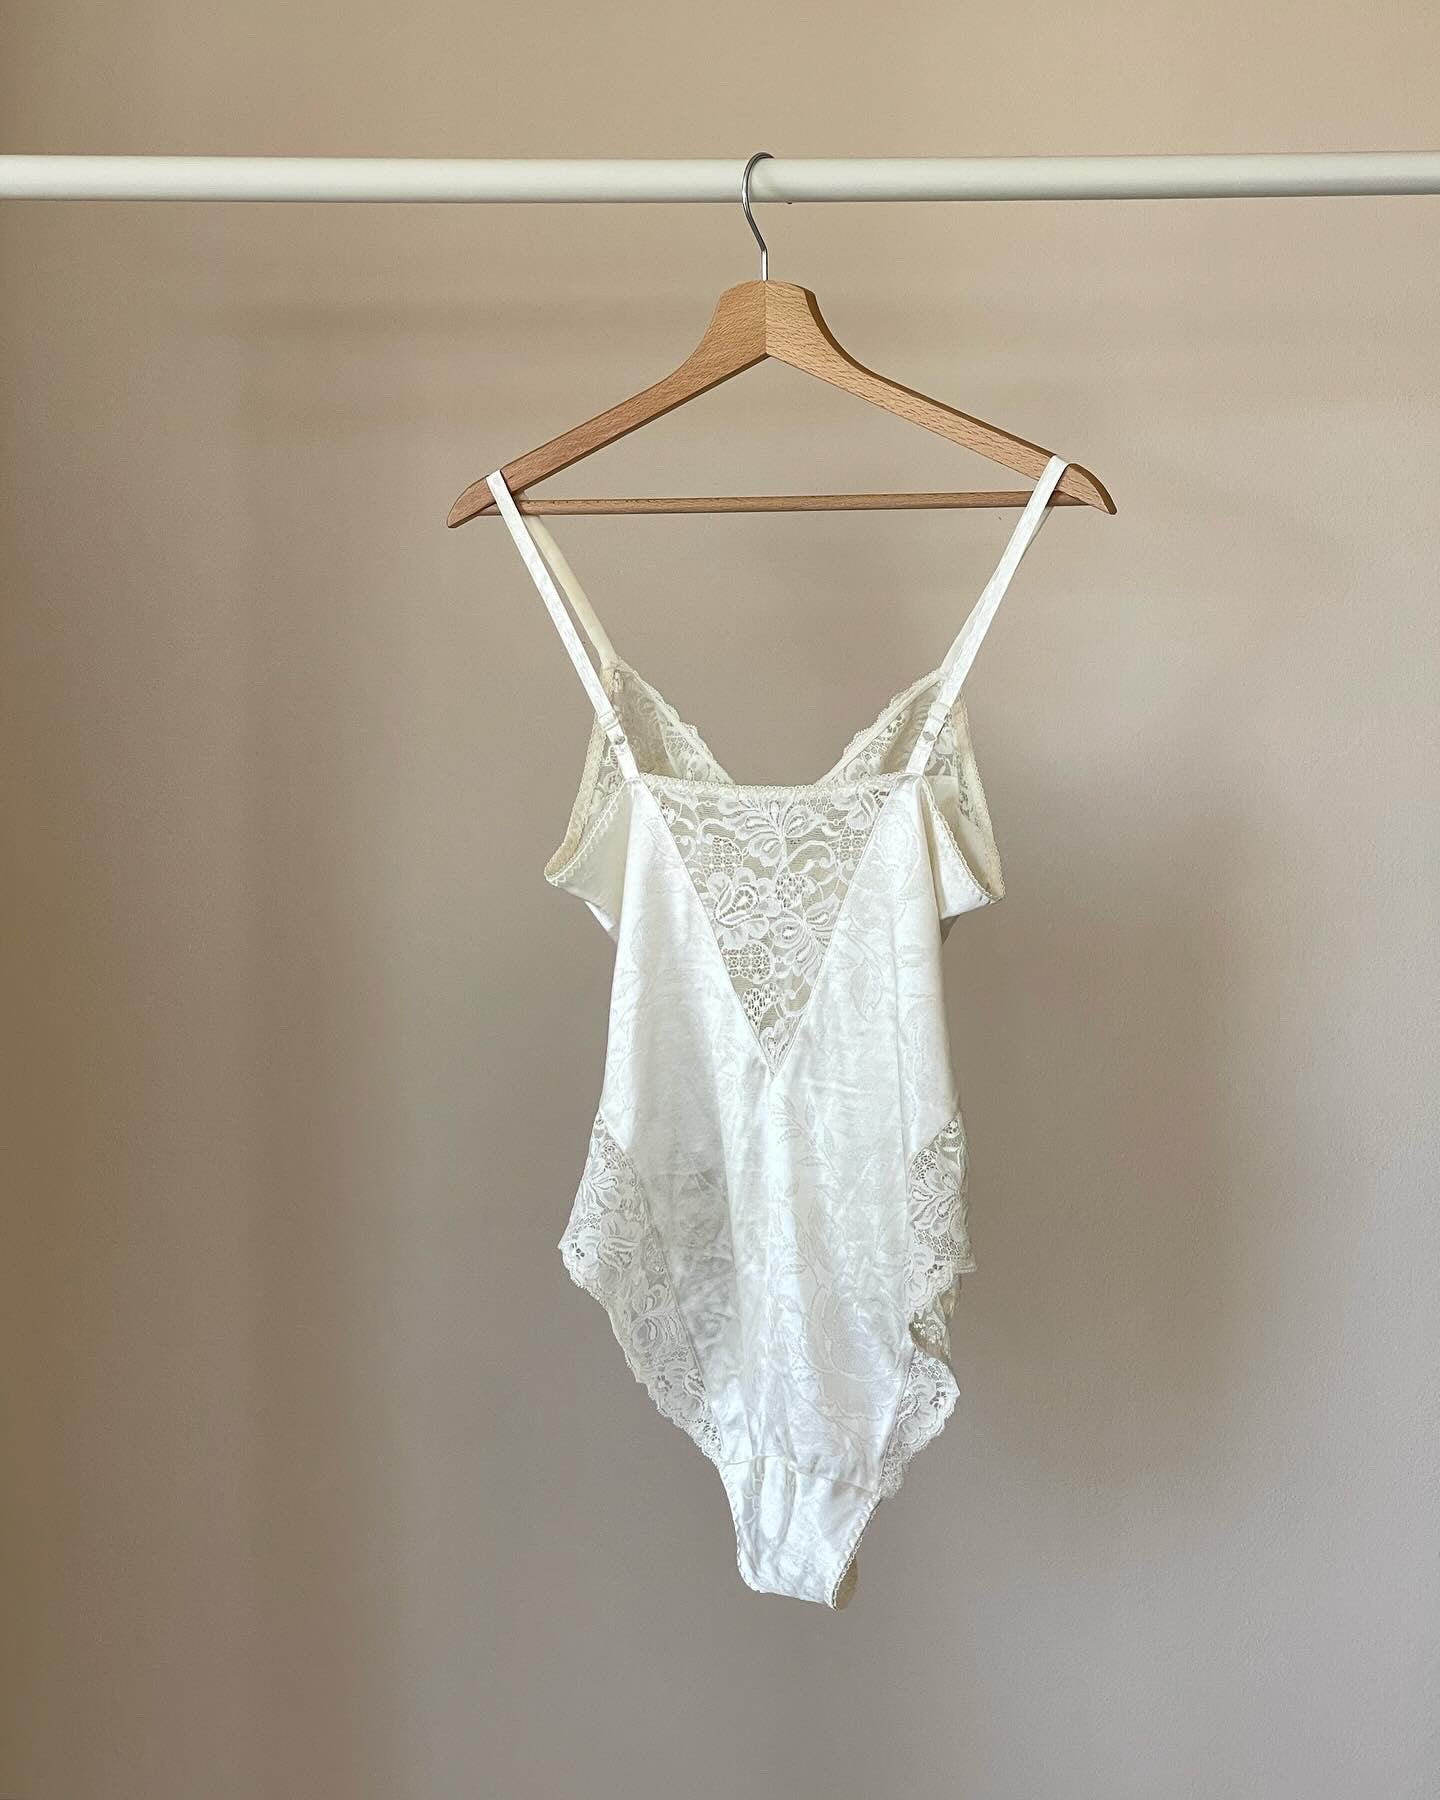 Lovely vintage bodysuit with lace details